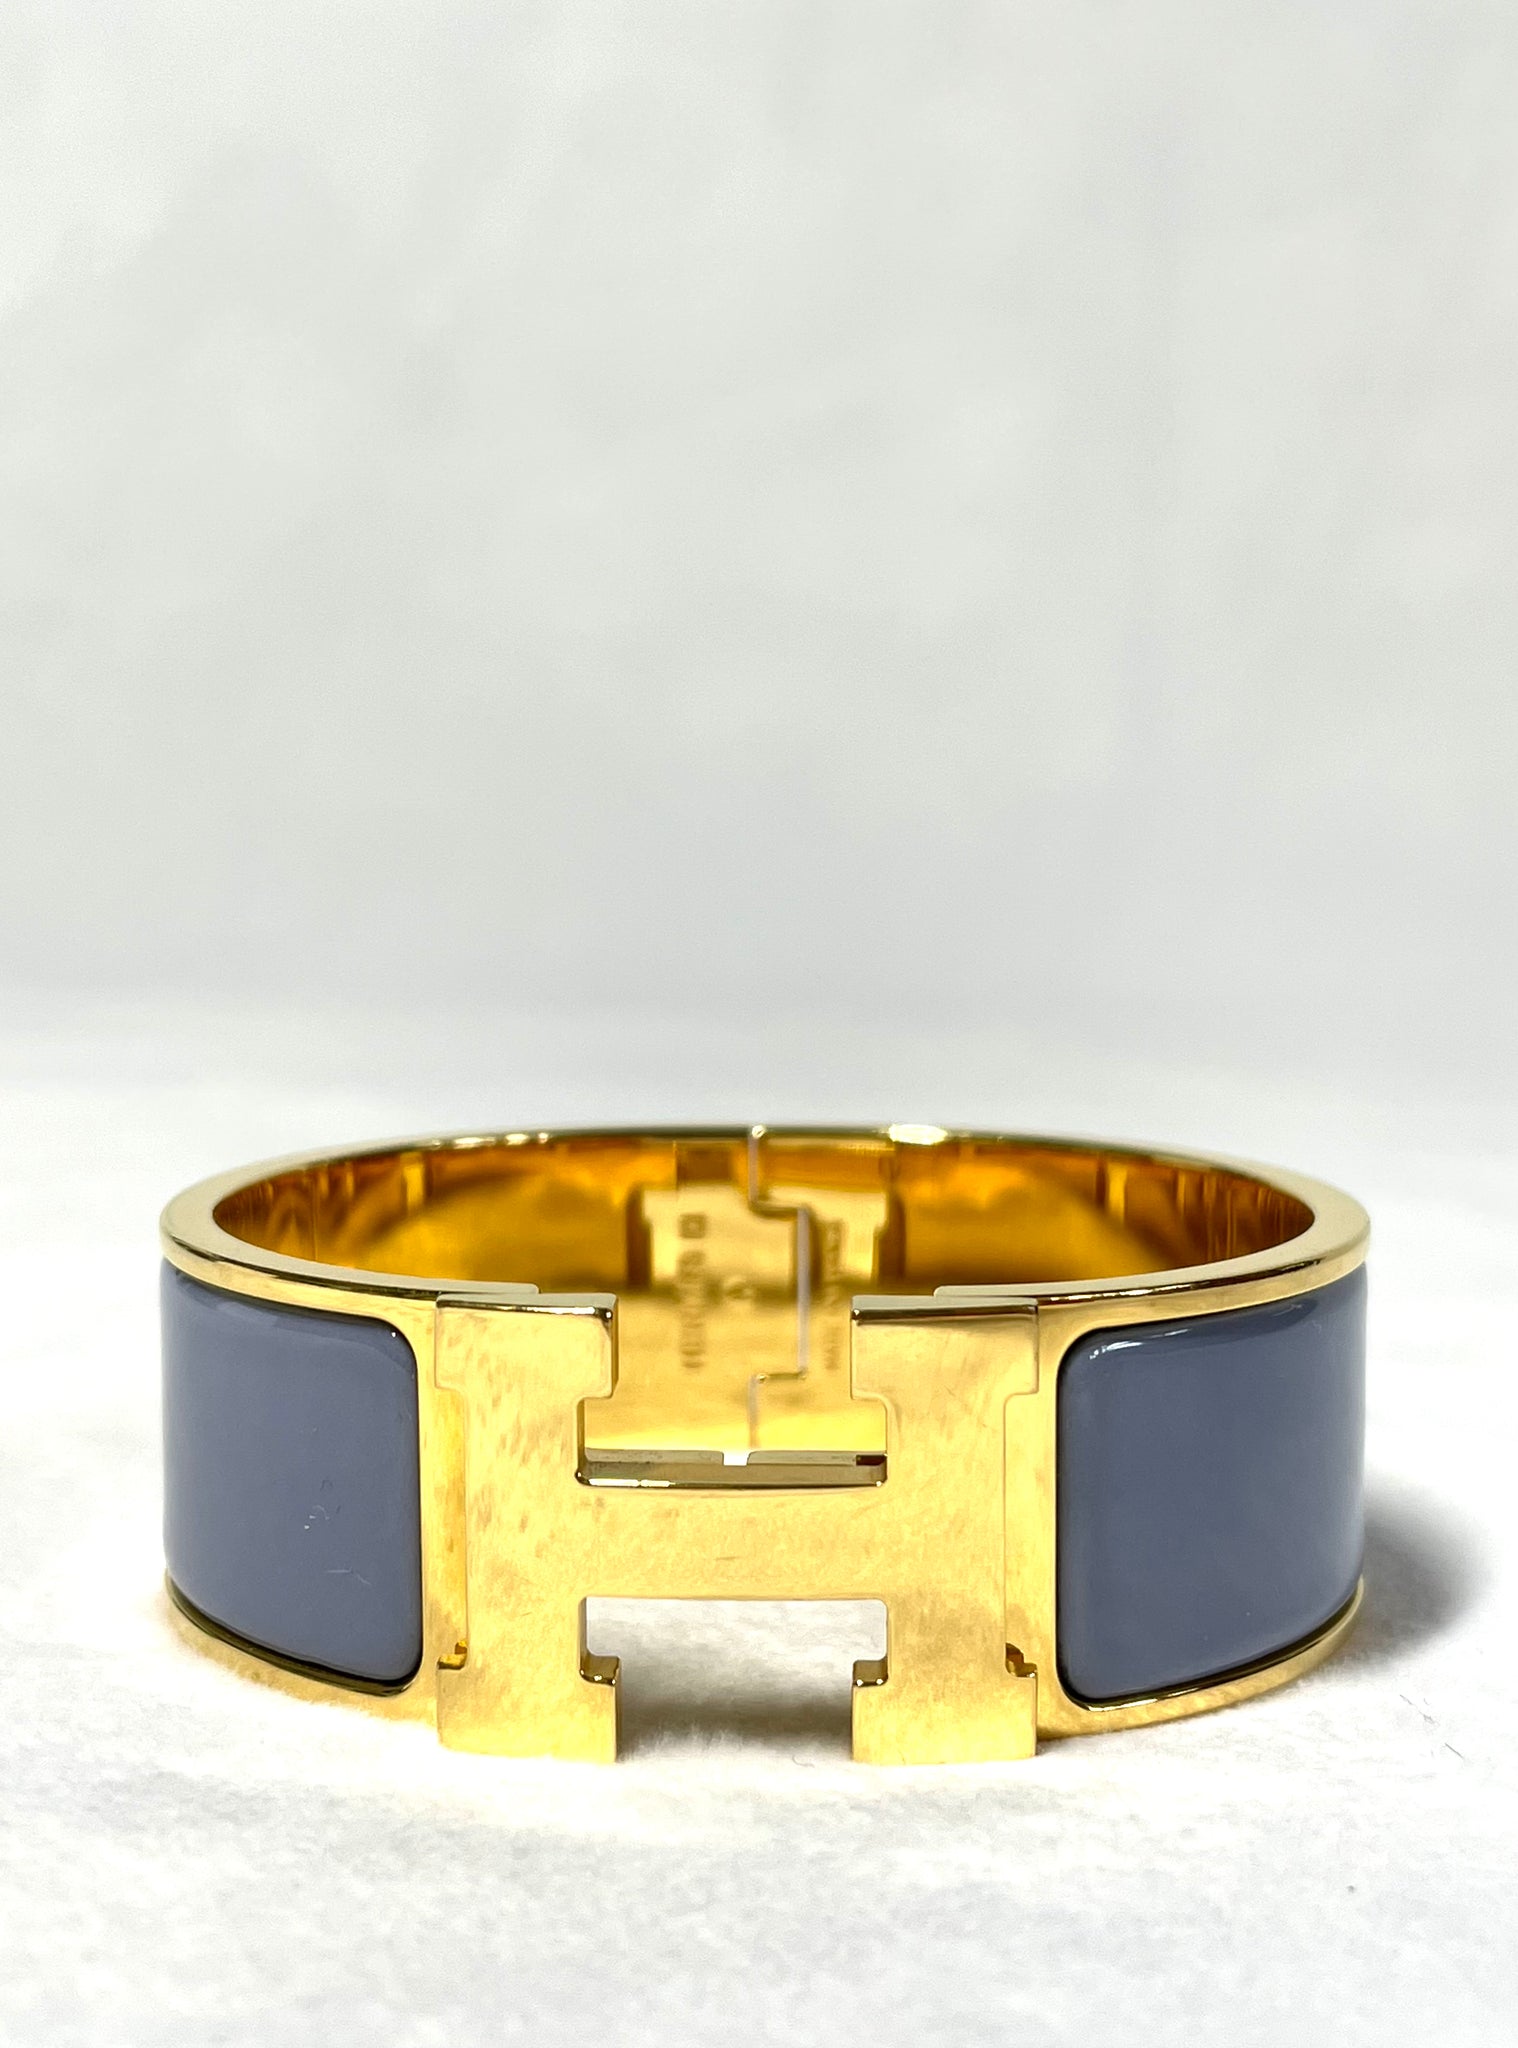 Pre Loved Hermes Clic H Cliquetis Bracelet in gold and blueish grey available at UniKoncept in Waterloo